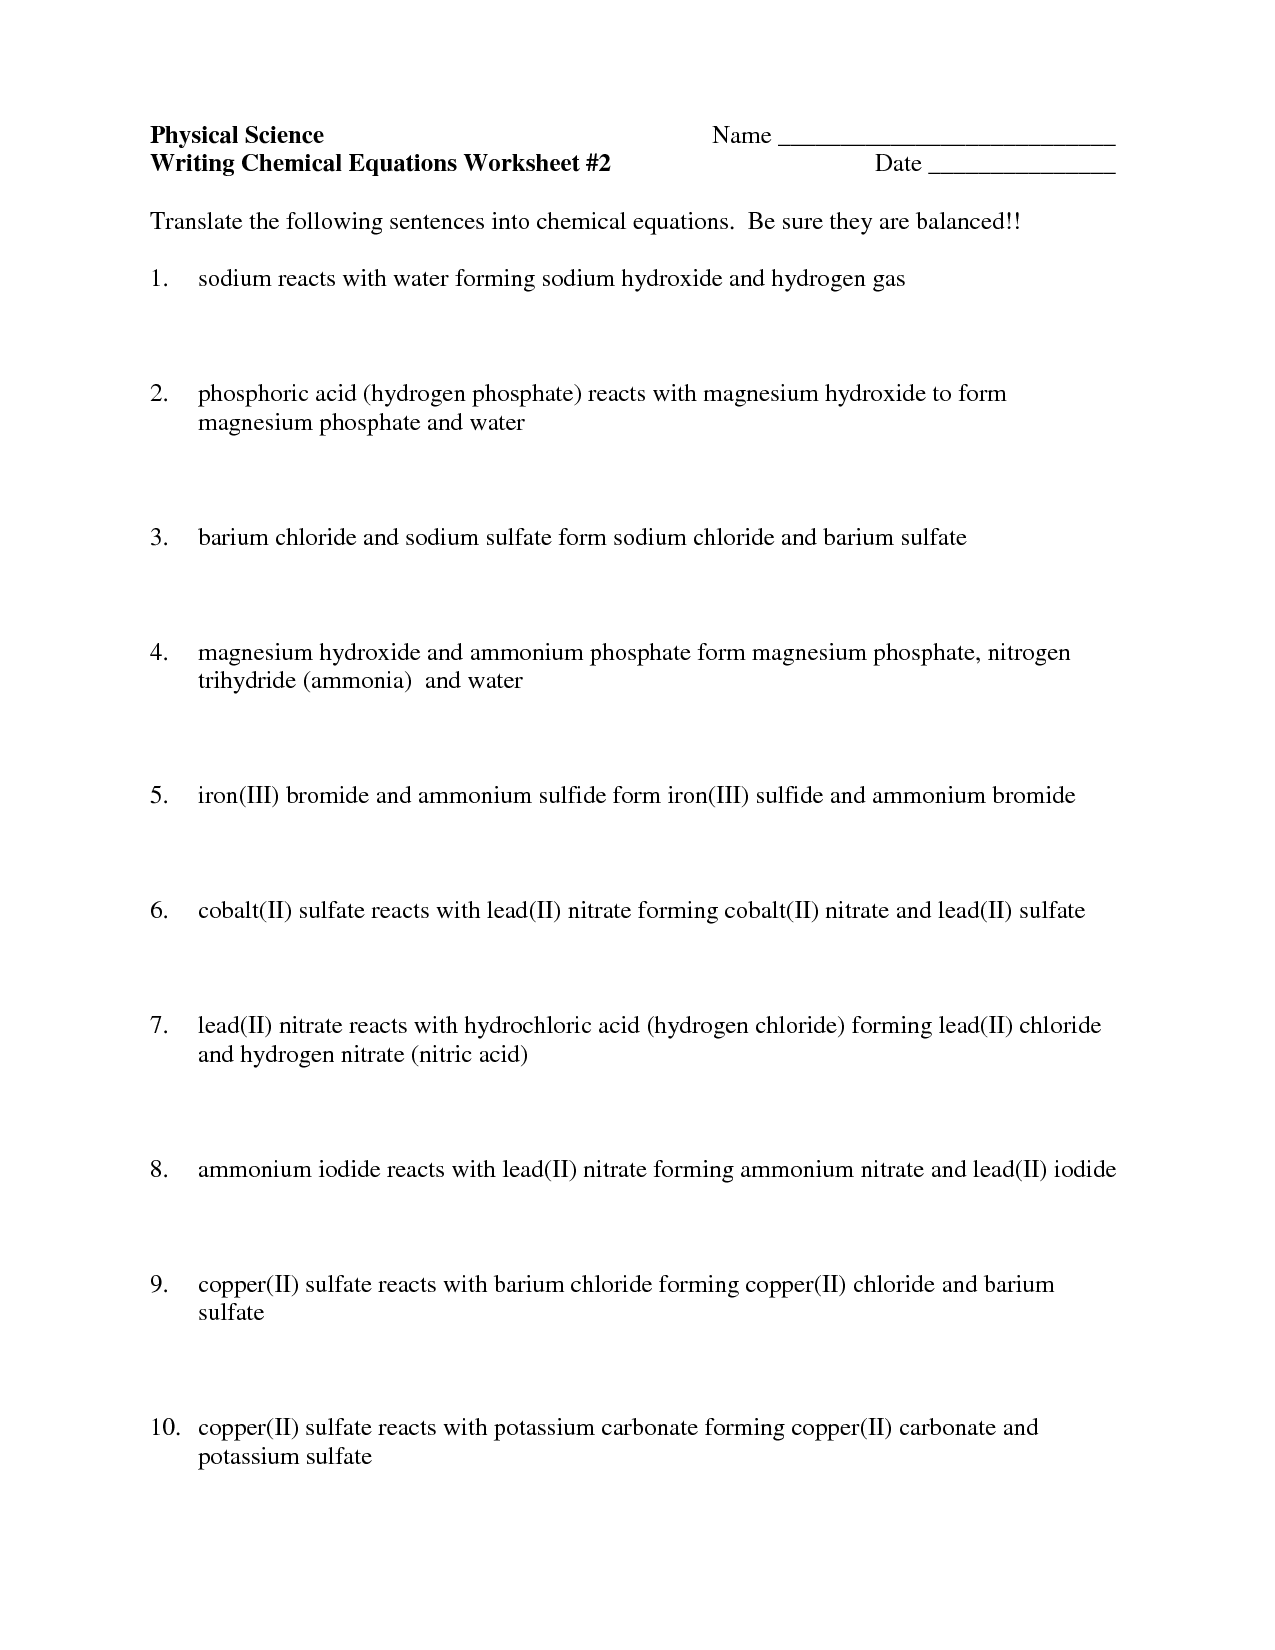 Writing Chemical Equations Worksheet Answers Image